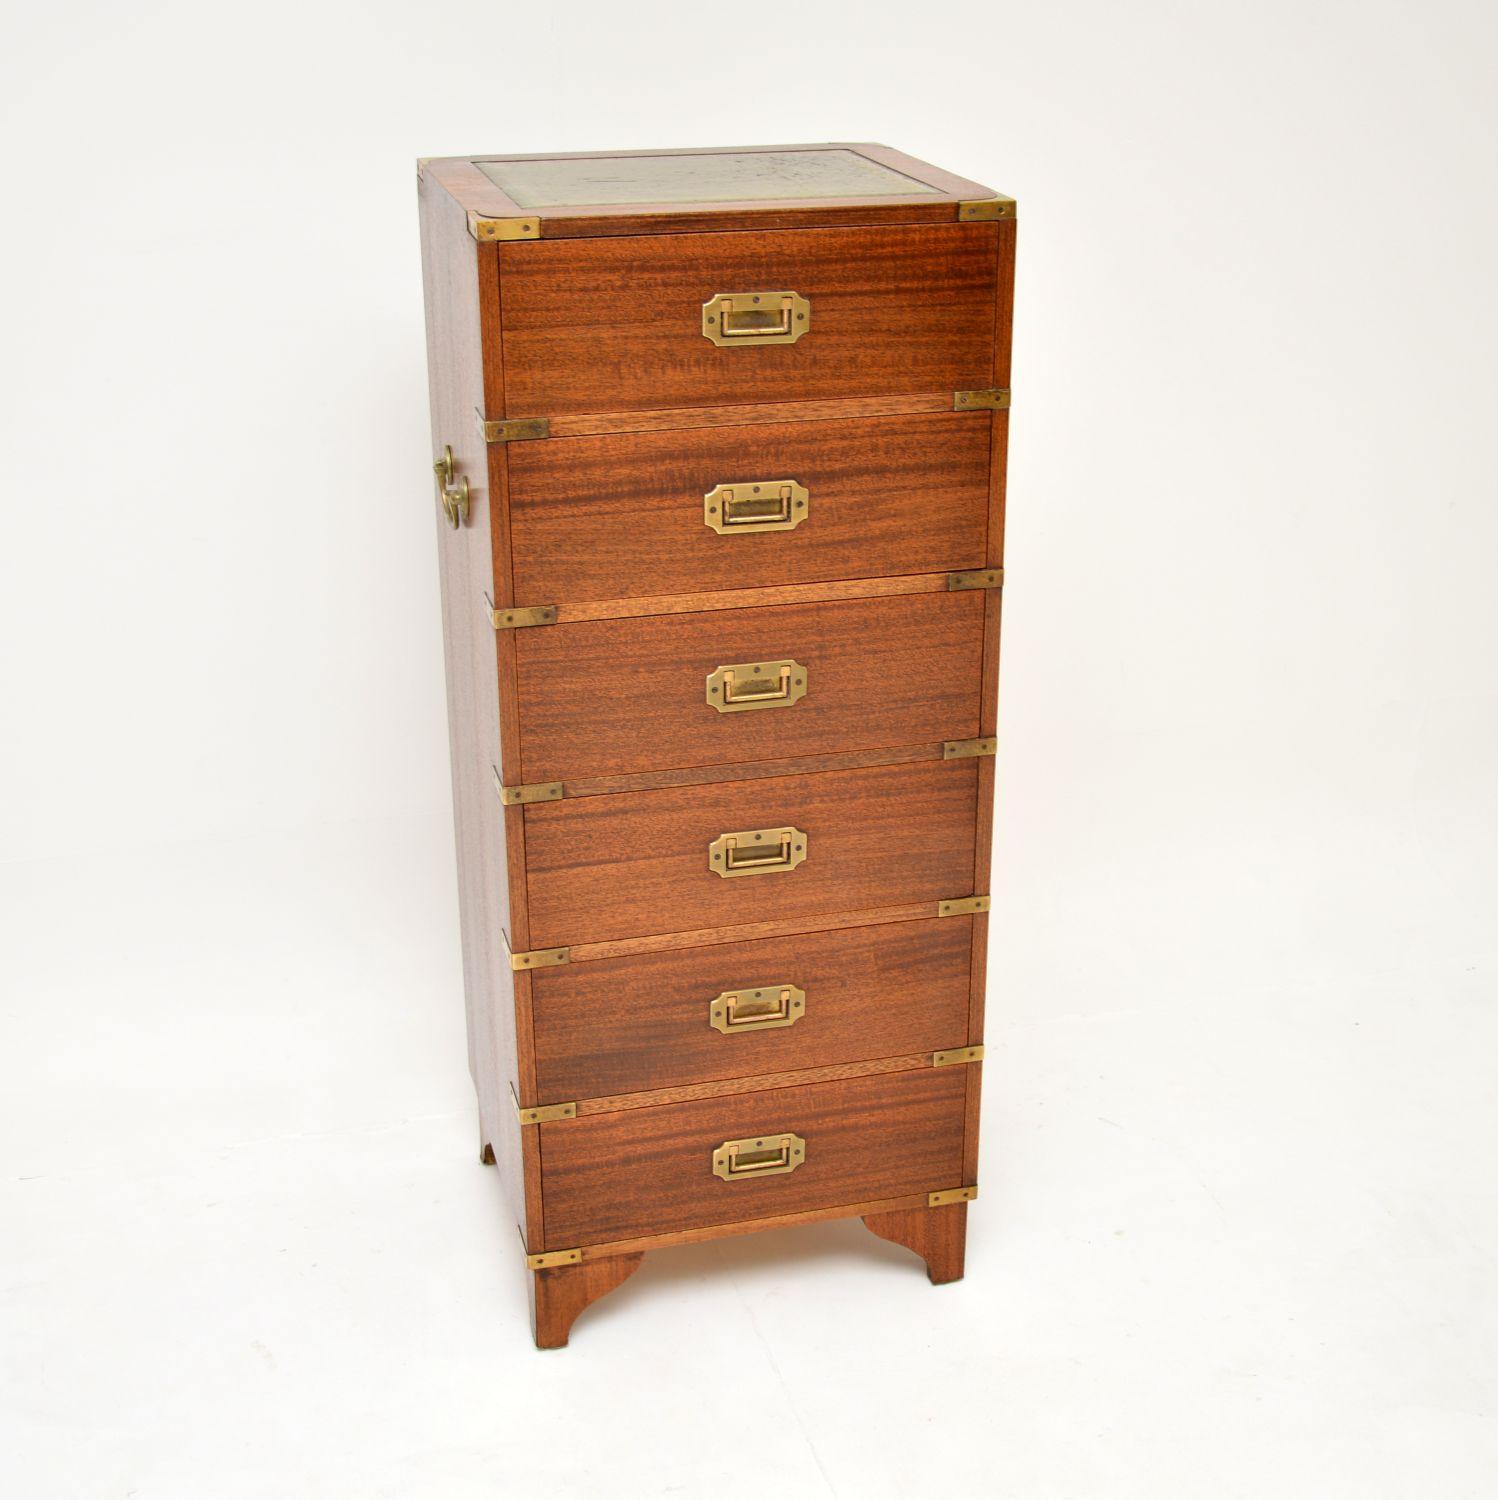 A smart and very well made antique chest of drawers in the military campaign style. This was made in England, it dates from around the 1930’s.

It is of lovely quality and is a very useful size, quite small and low, perfect for a bedside chest or